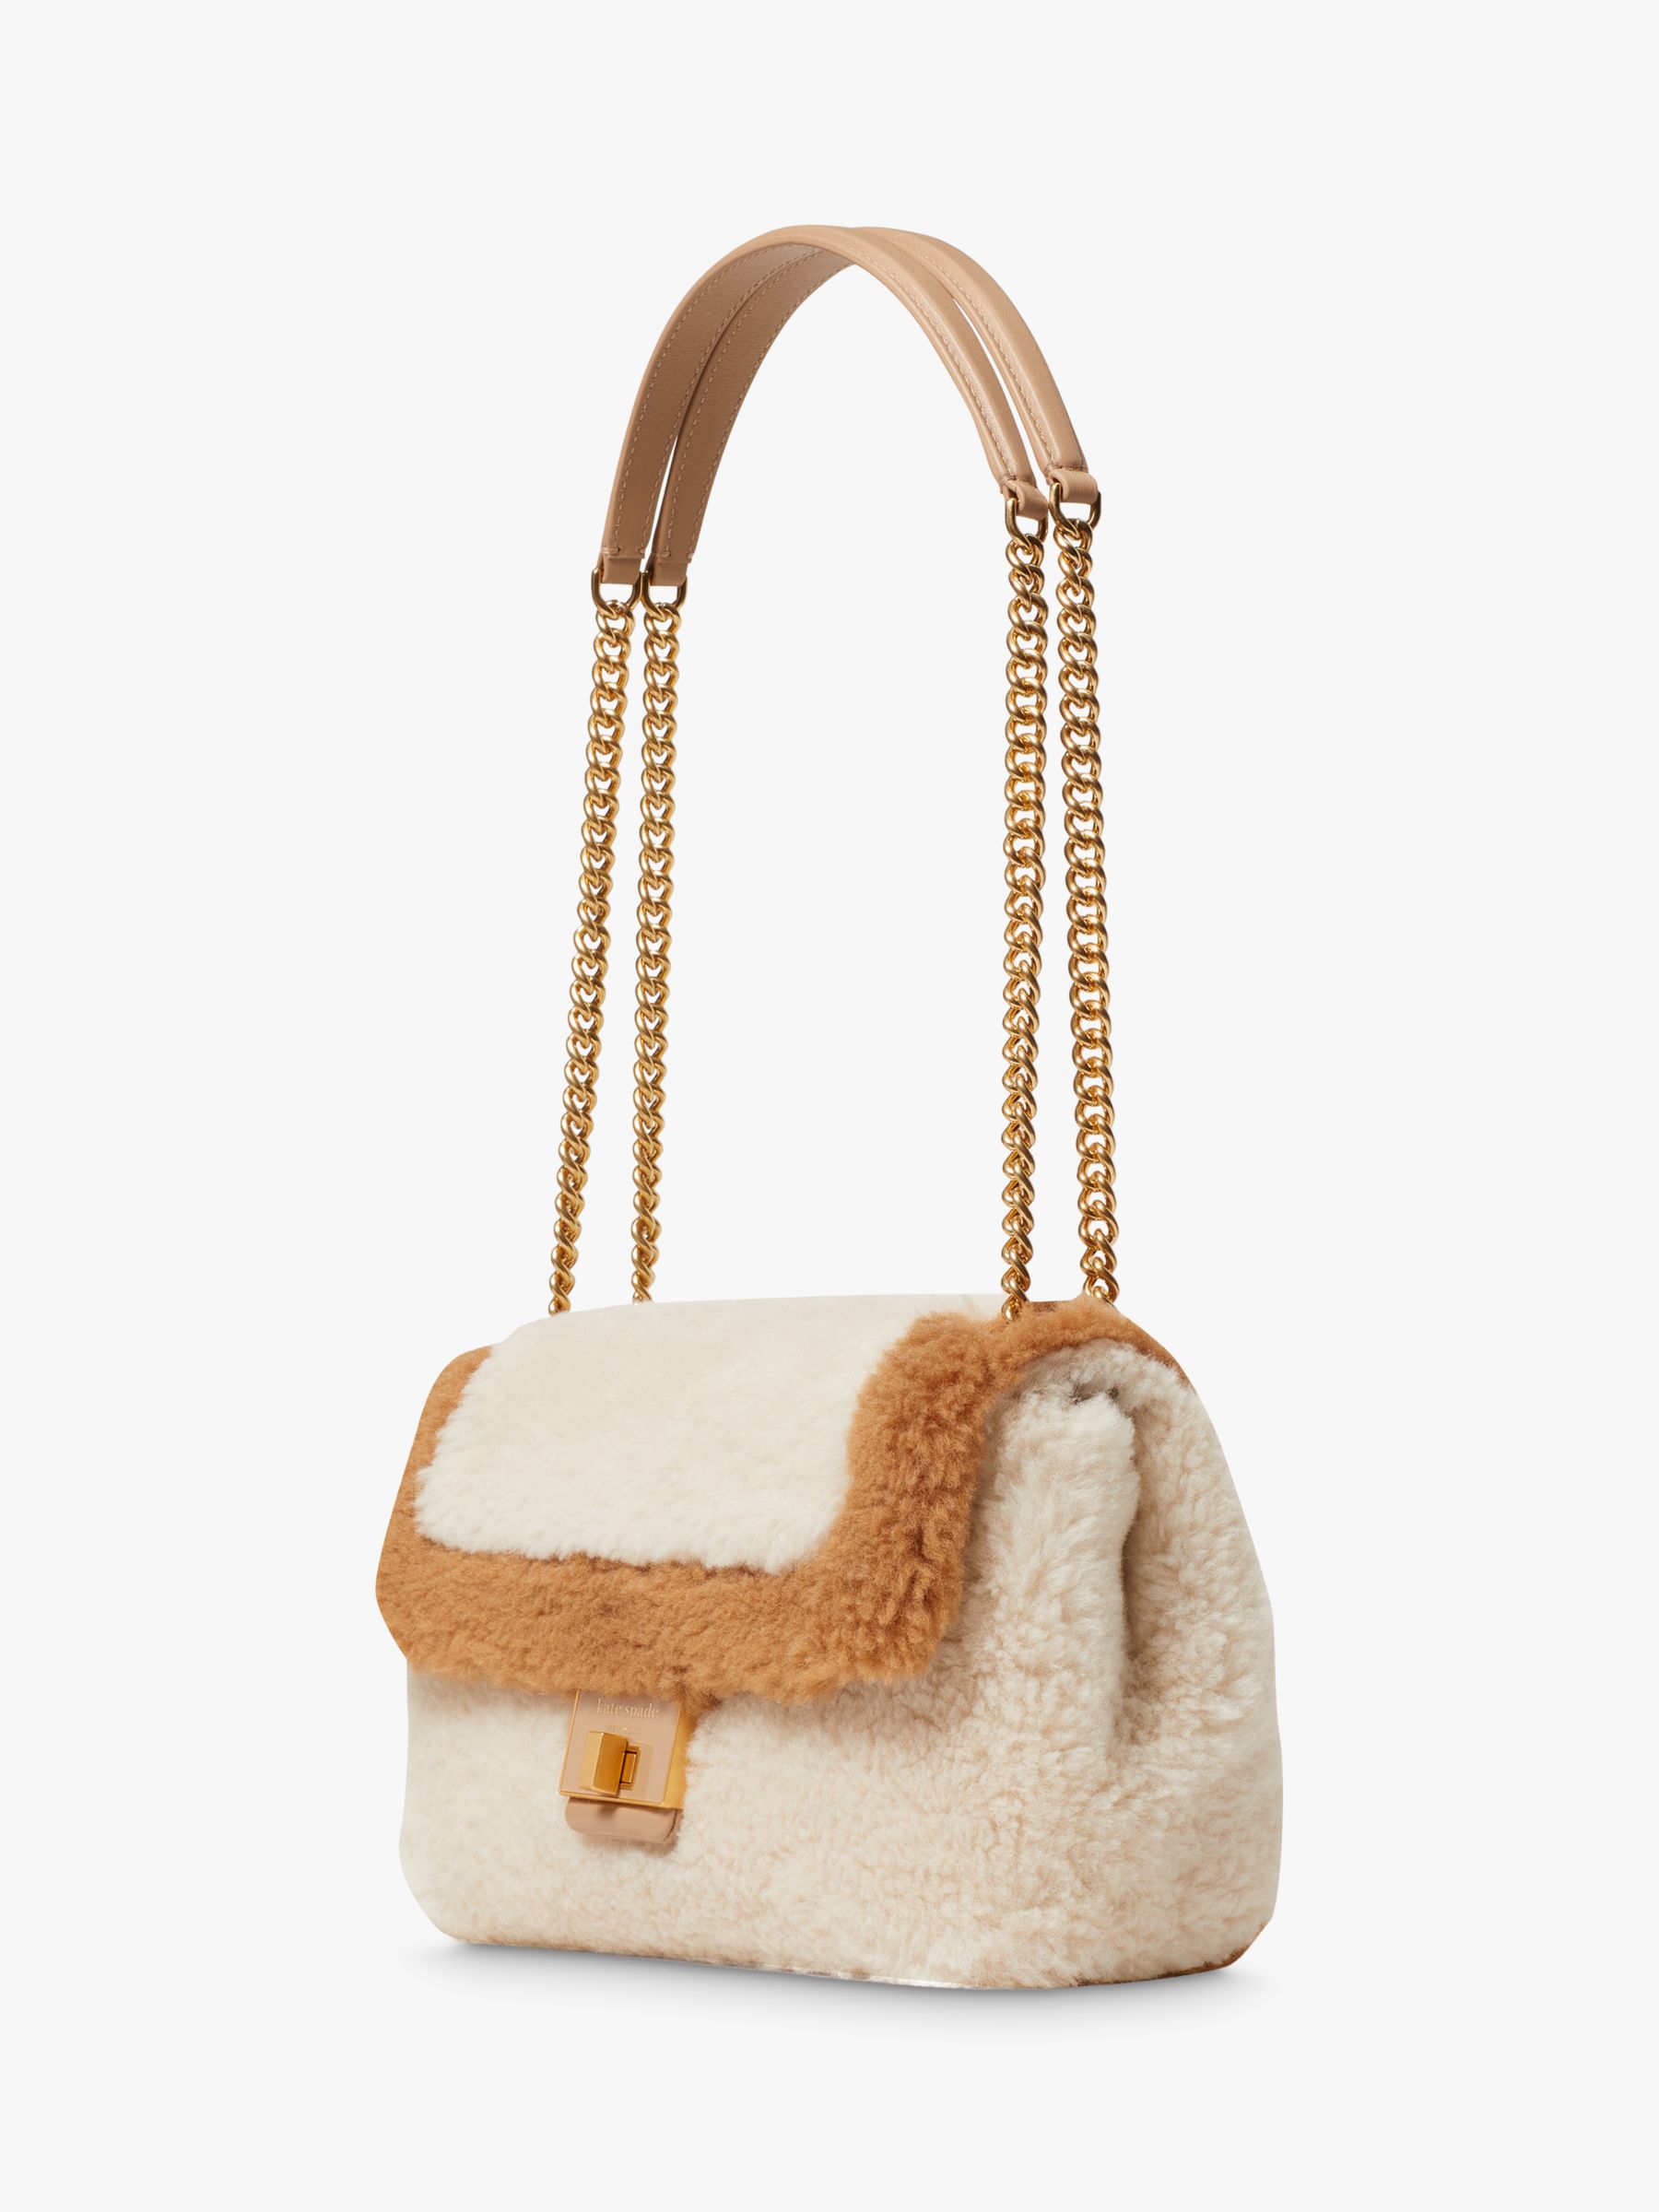 kate spade new york Evelyn Faux Shearling Chain Strap Shoulder Bag,  Cream/Multi at John Lewis & Partners